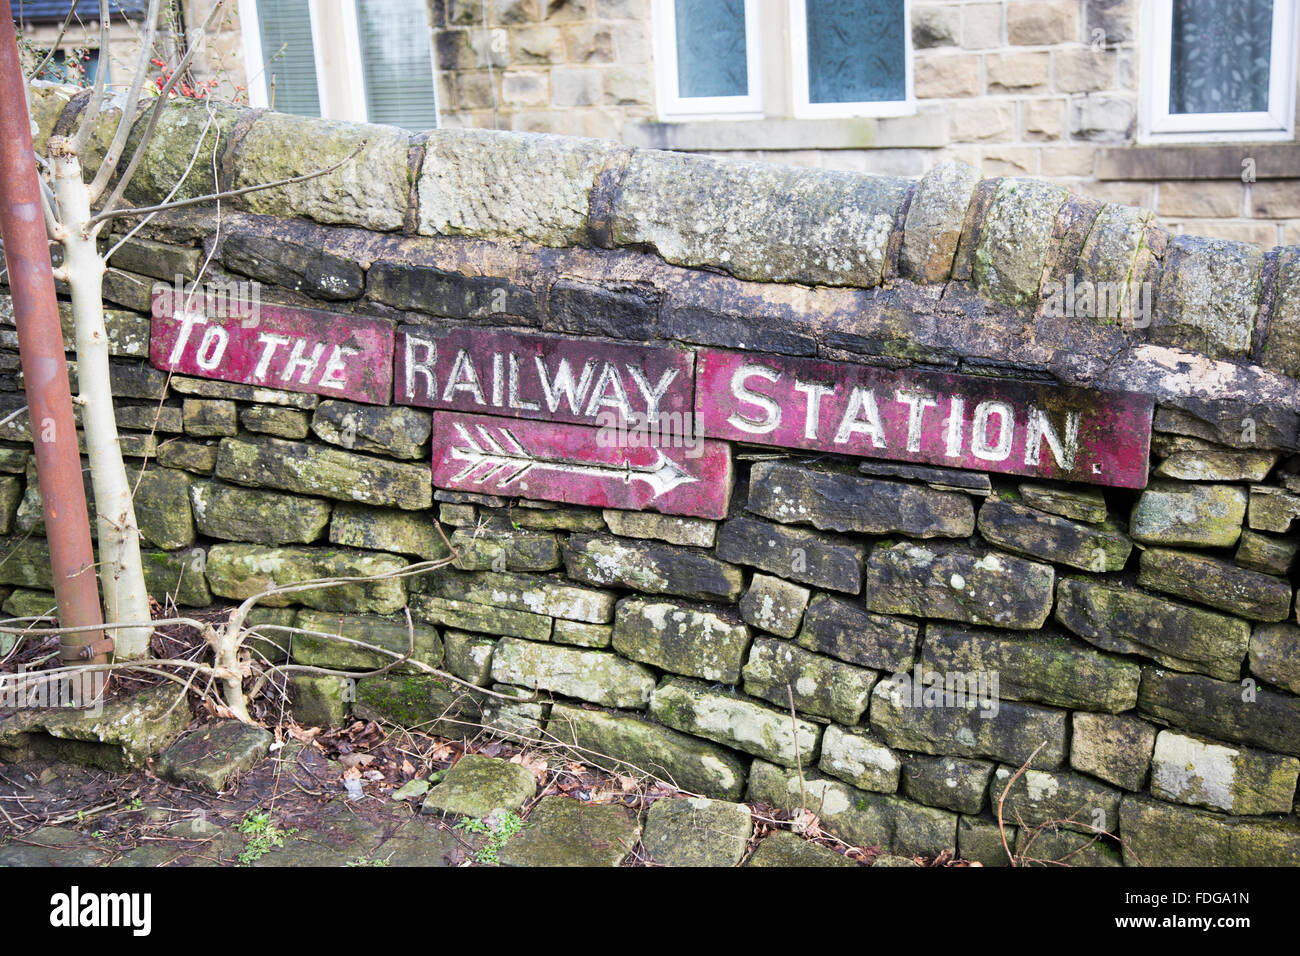 To the railway station sign in the village of Haworth, West Yorkshire, England, UK Stock Photo